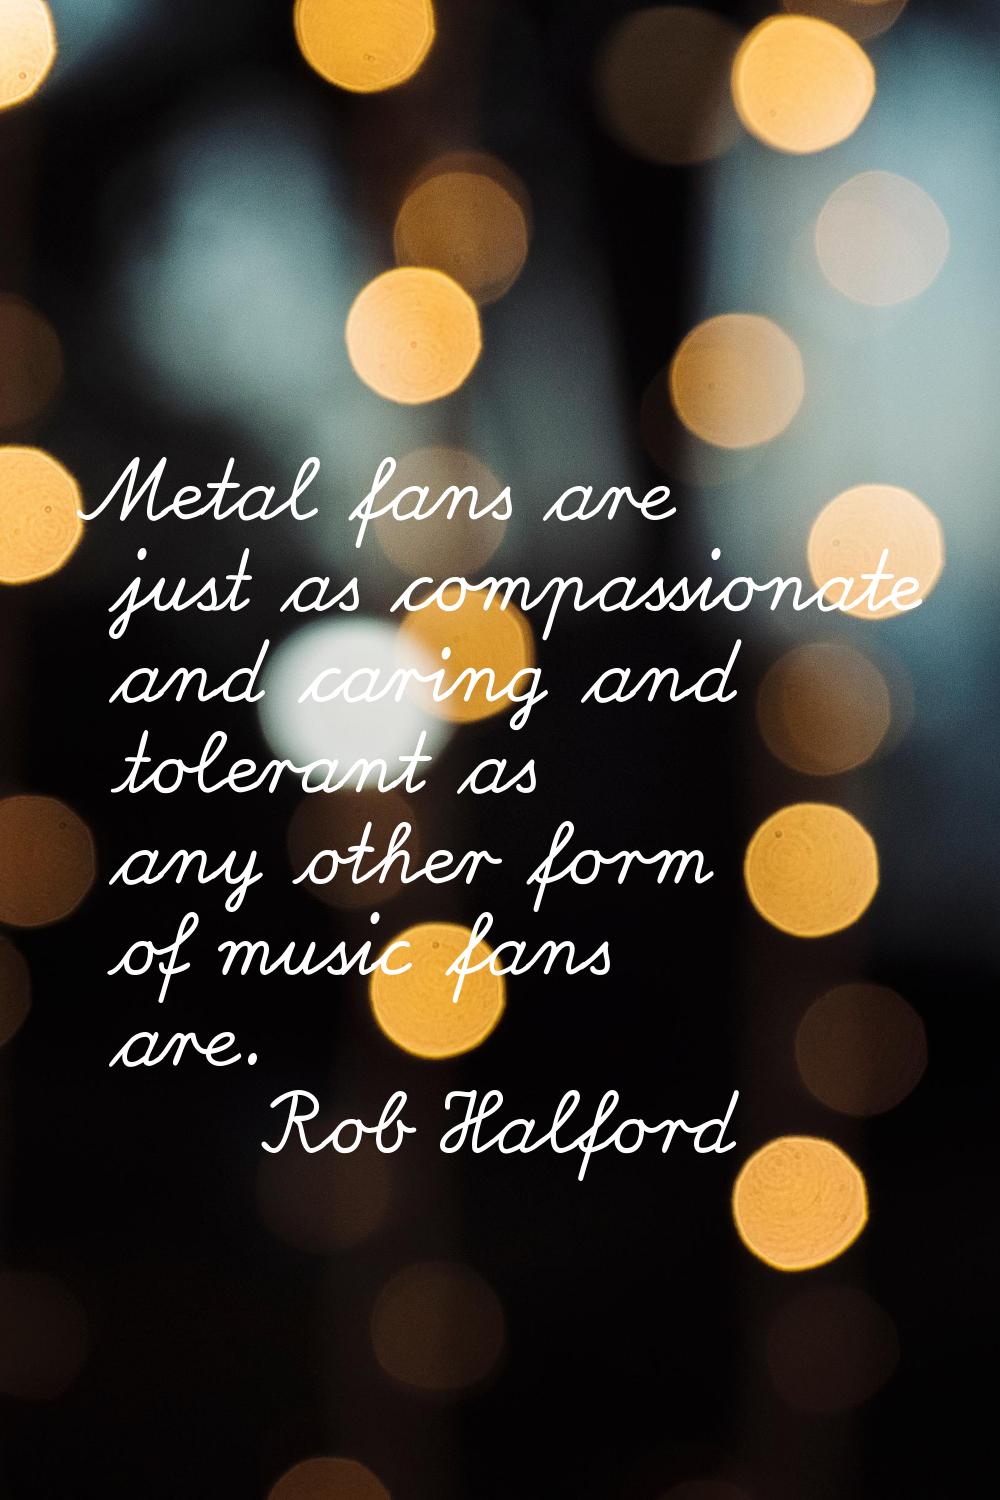 Metal fans are just as compassionate and caring and tolerant as any other form of music fans are.